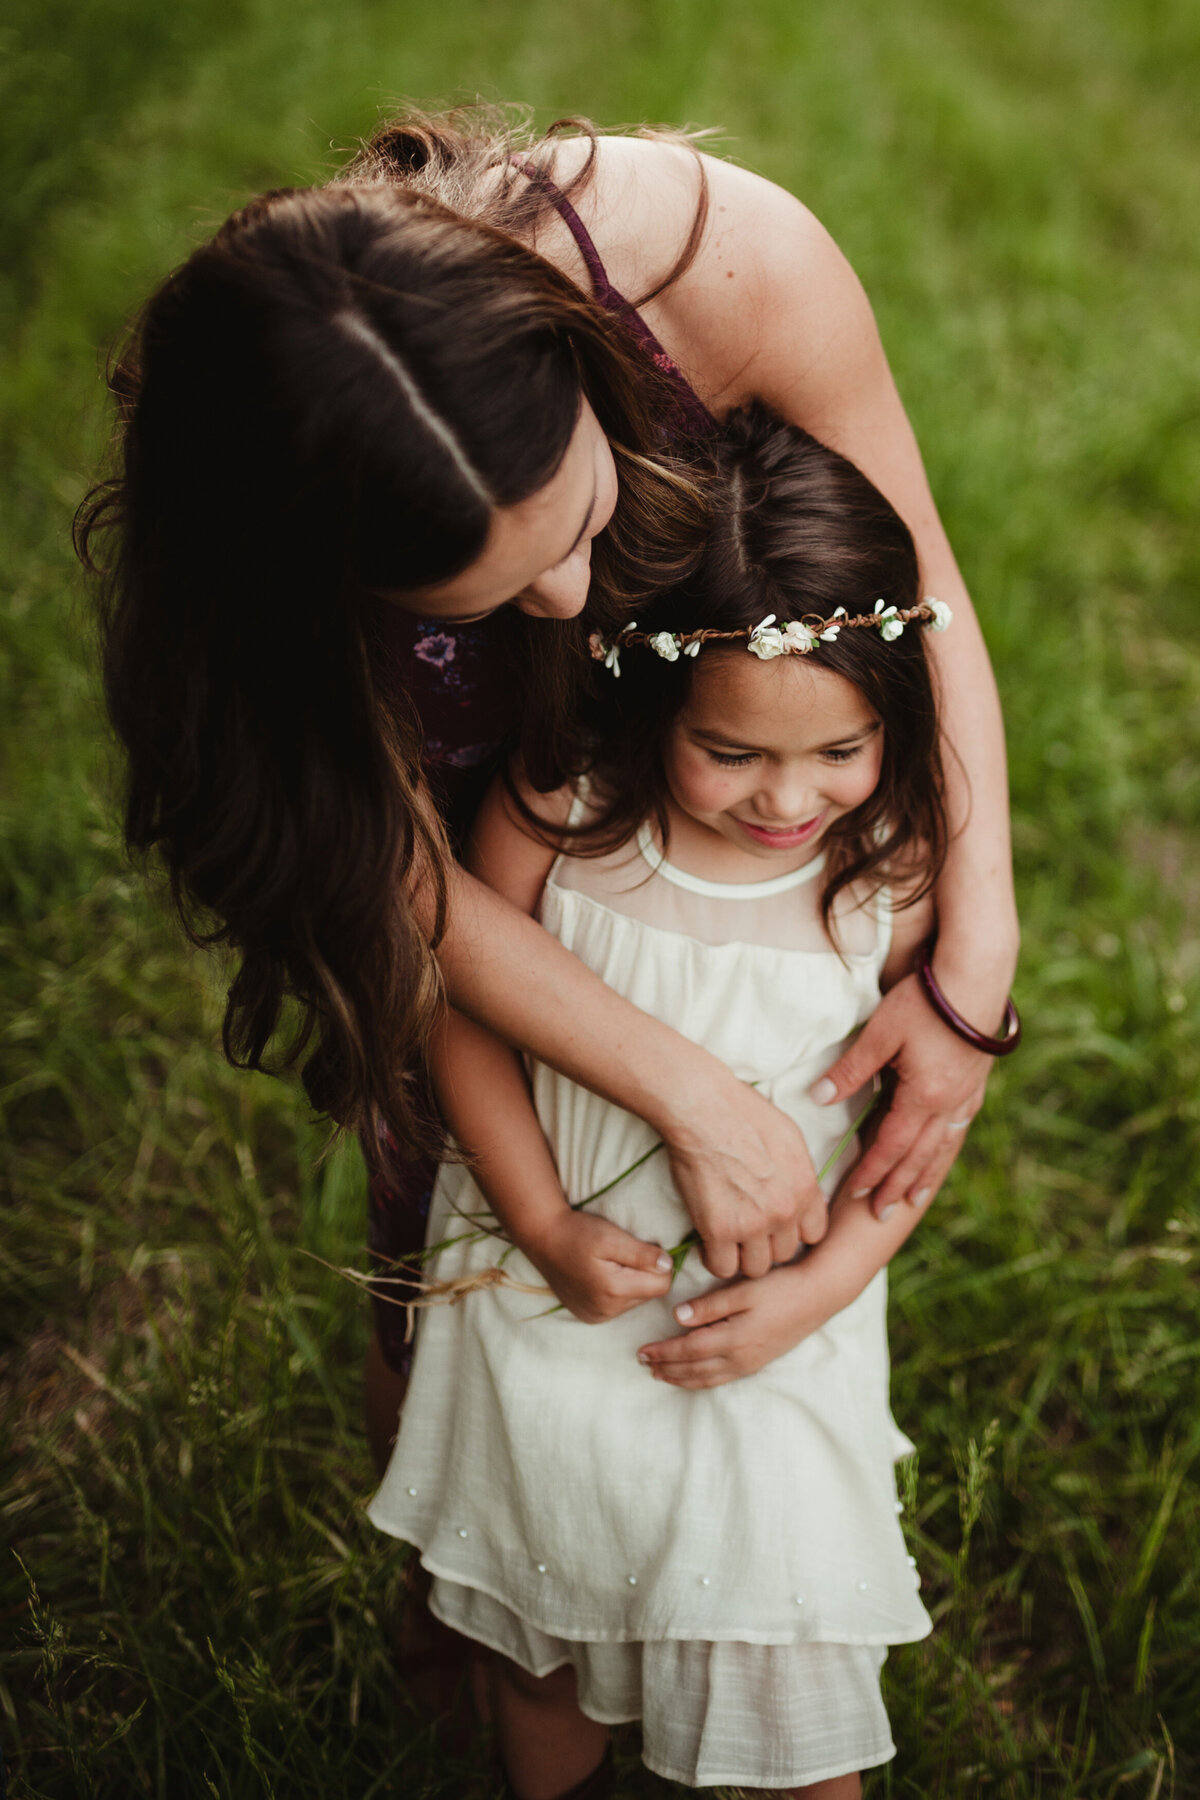 Mother hugs daughter wearing a flower crown and ivory dress from behind.